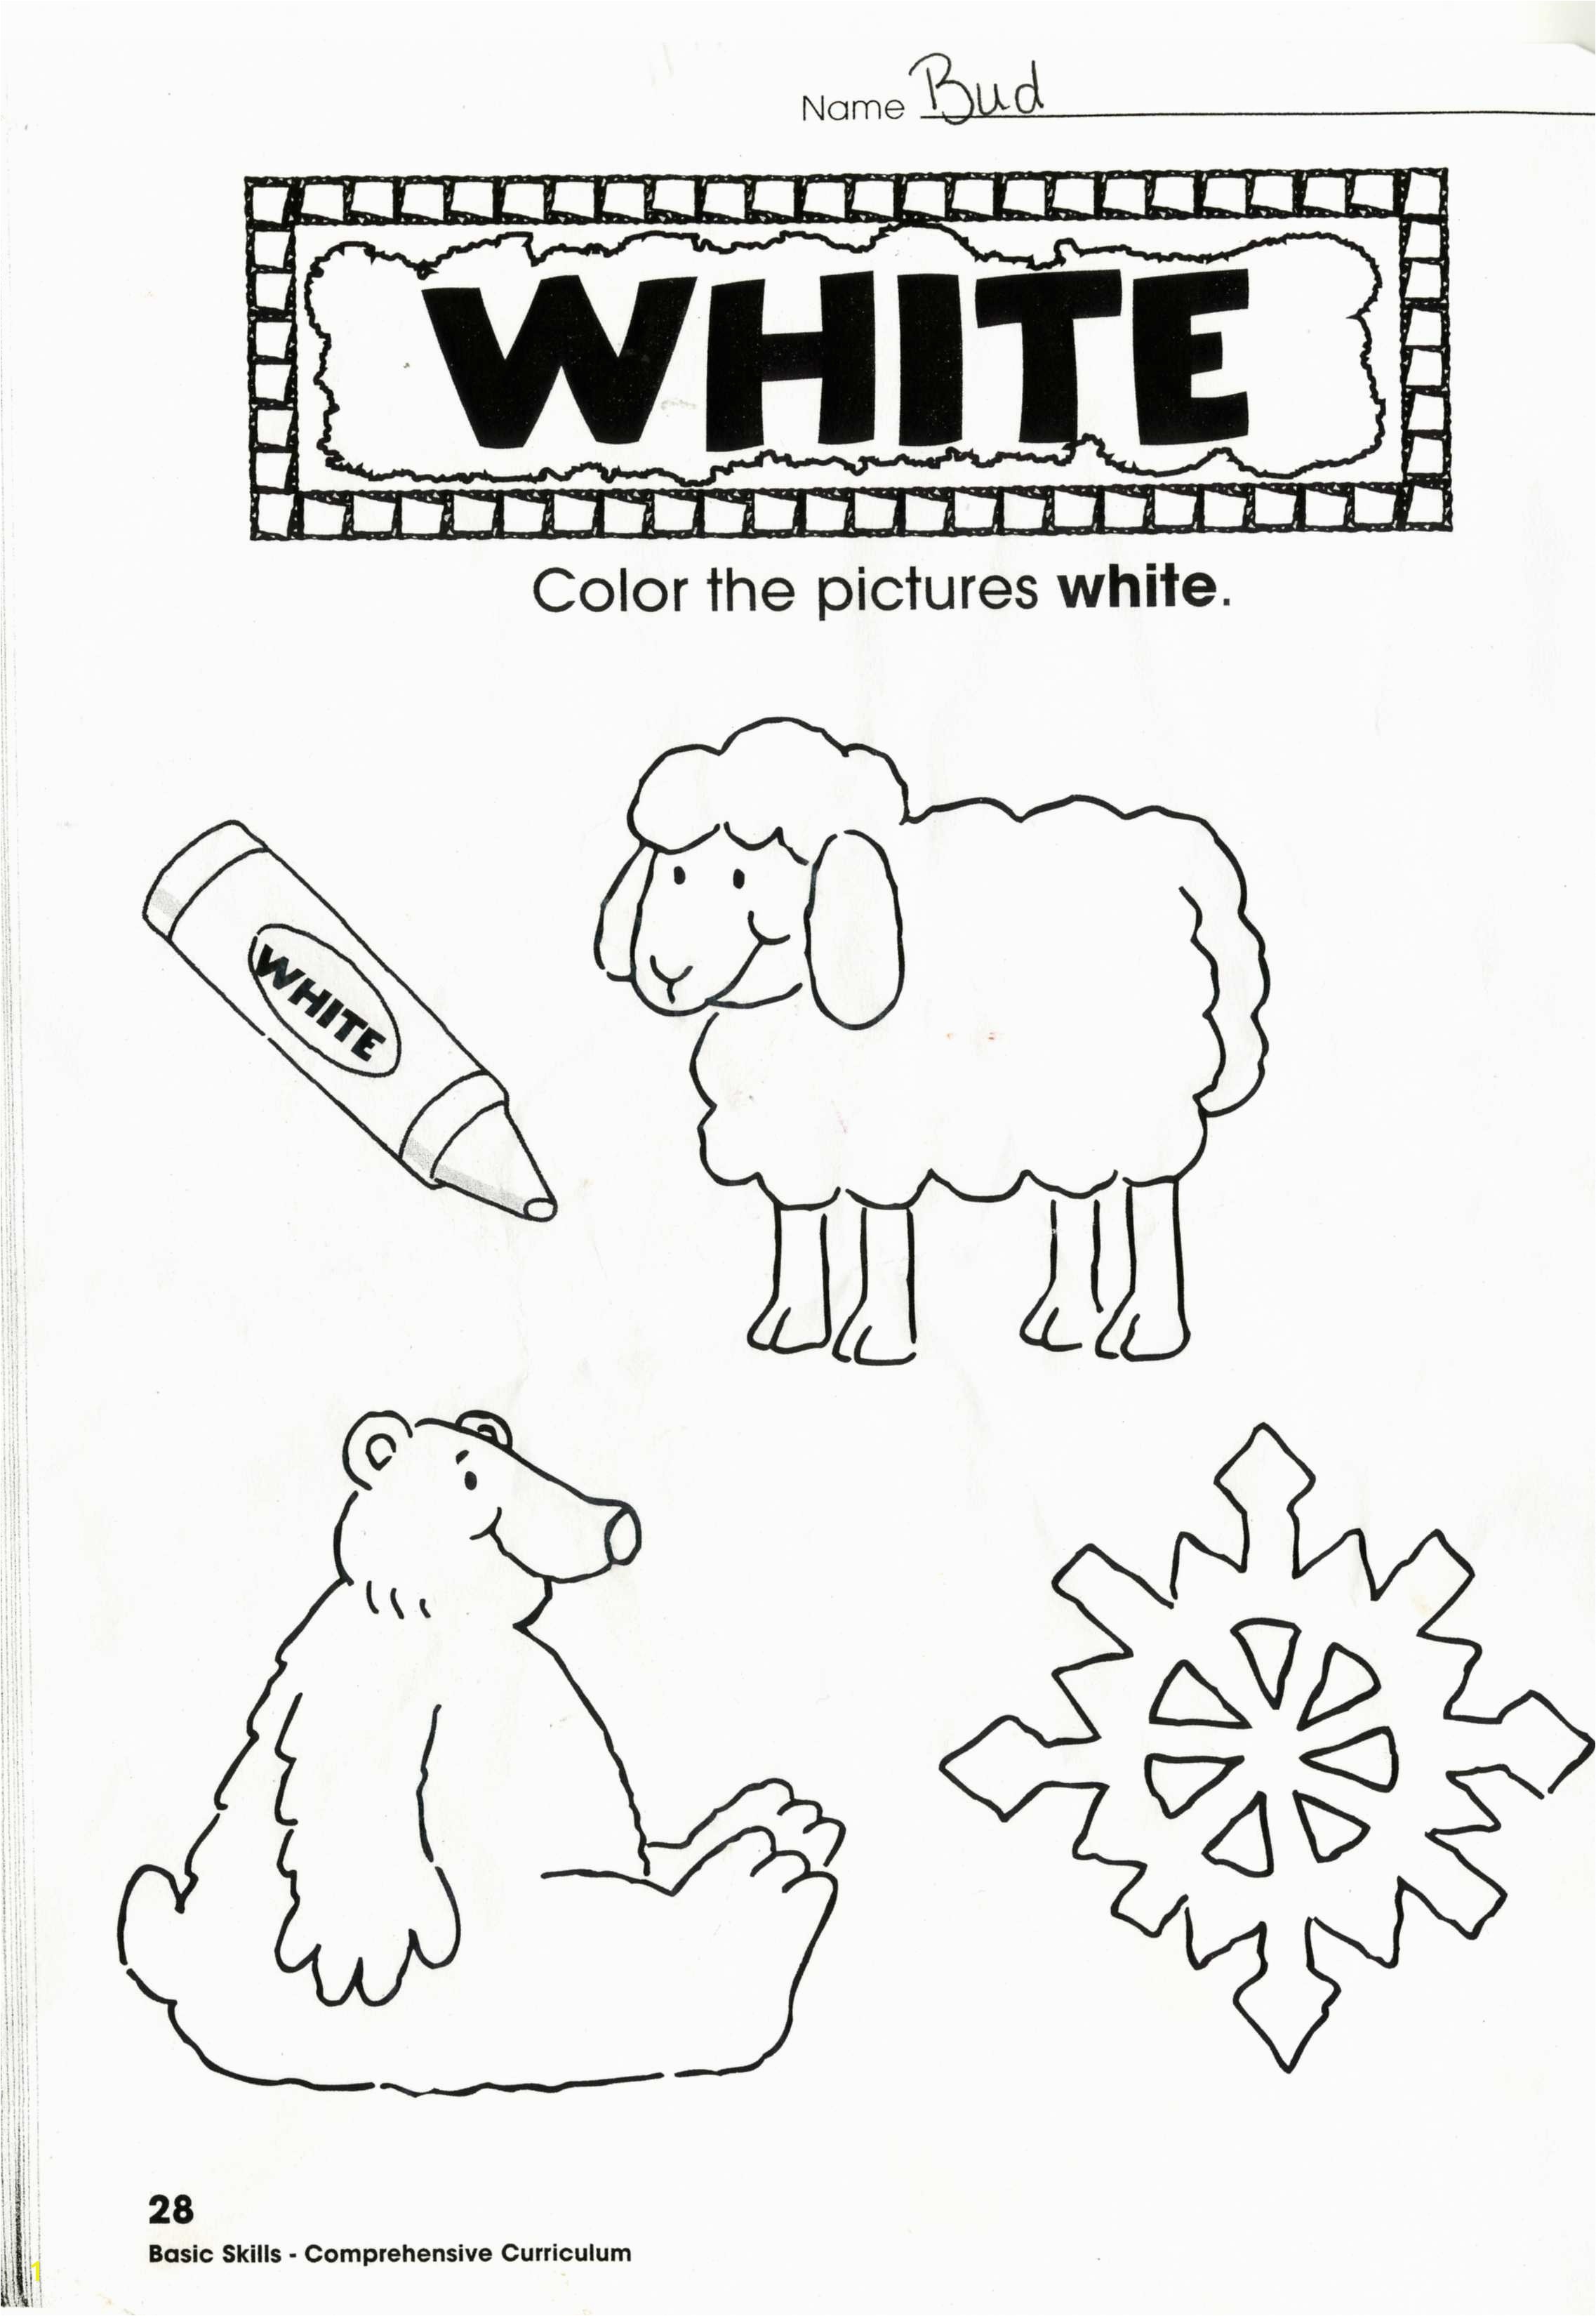 Cairn Terrier Coloring Pages Full Blue Crayon Coloring Page Cairn Terrier Pages Collection